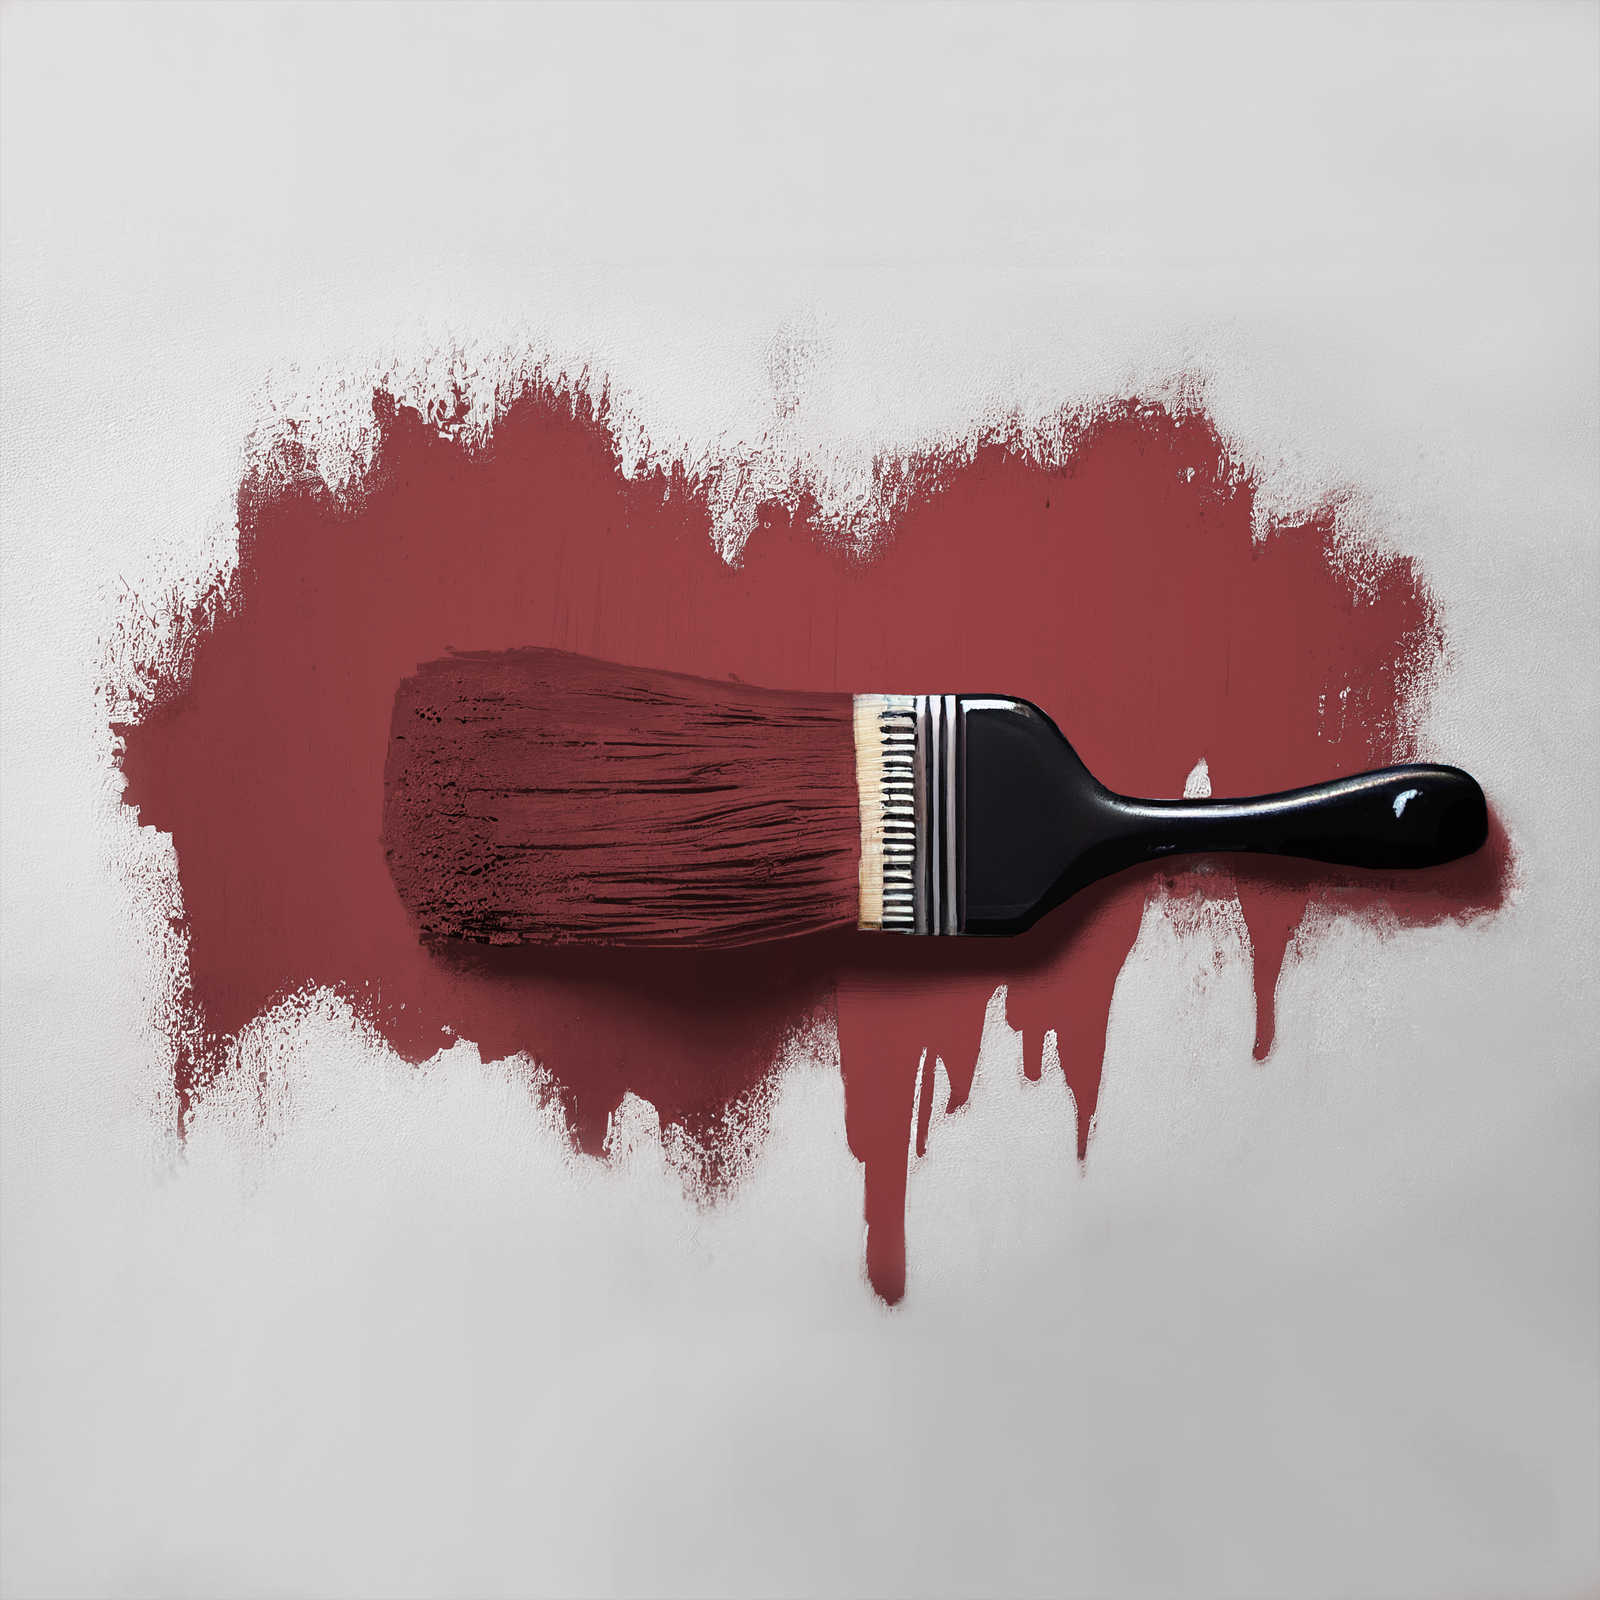             Wall Paint TCK7006 »Perky Pomegranate« in passionate dark red – 5.0 litre
        